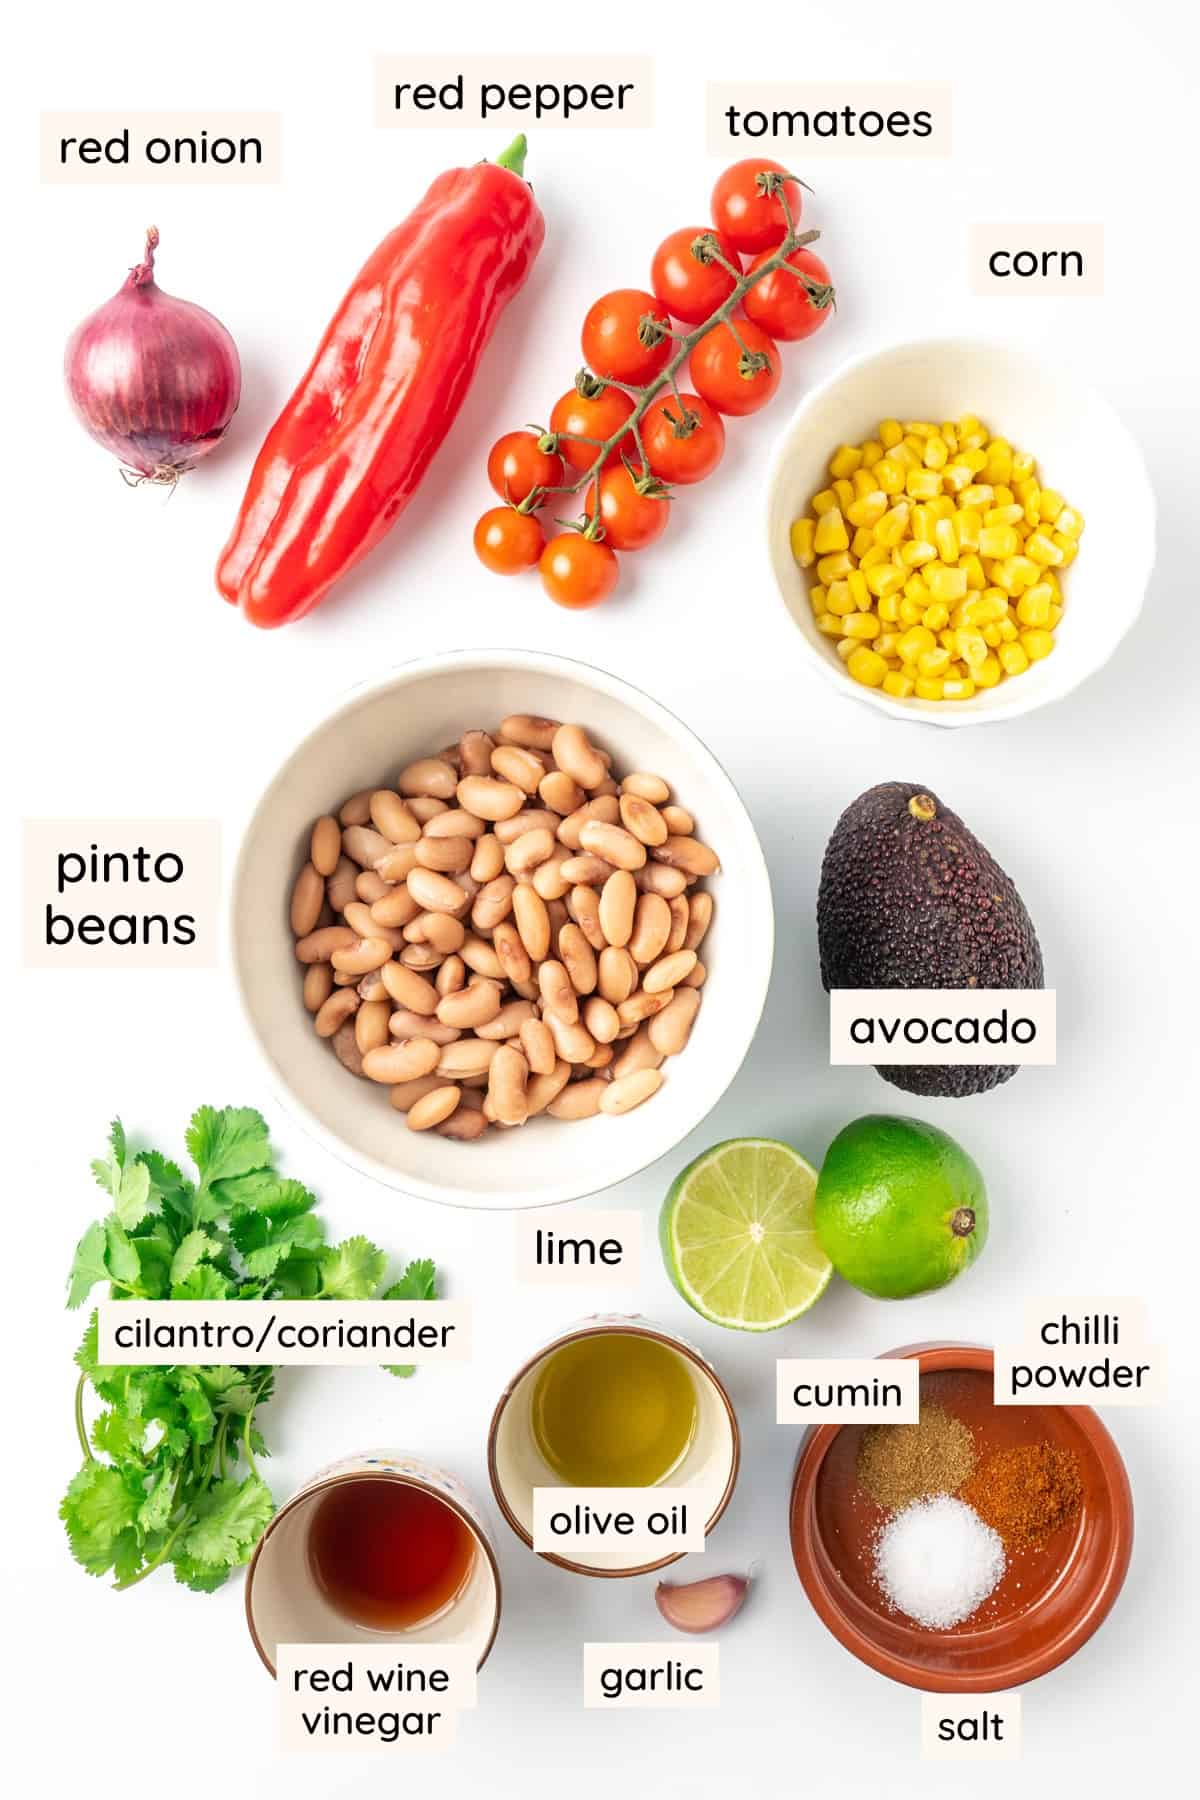 Ingredients of pinto bean salad: Cooked pinto beans, a red onion, an avocado, a red pepper, cherry tomatoes, sweetcorn, fresh cilantro, a lime, olive oil, red wine vinegar, a clove of garlic, ground cumin, chilli powder, and salt.